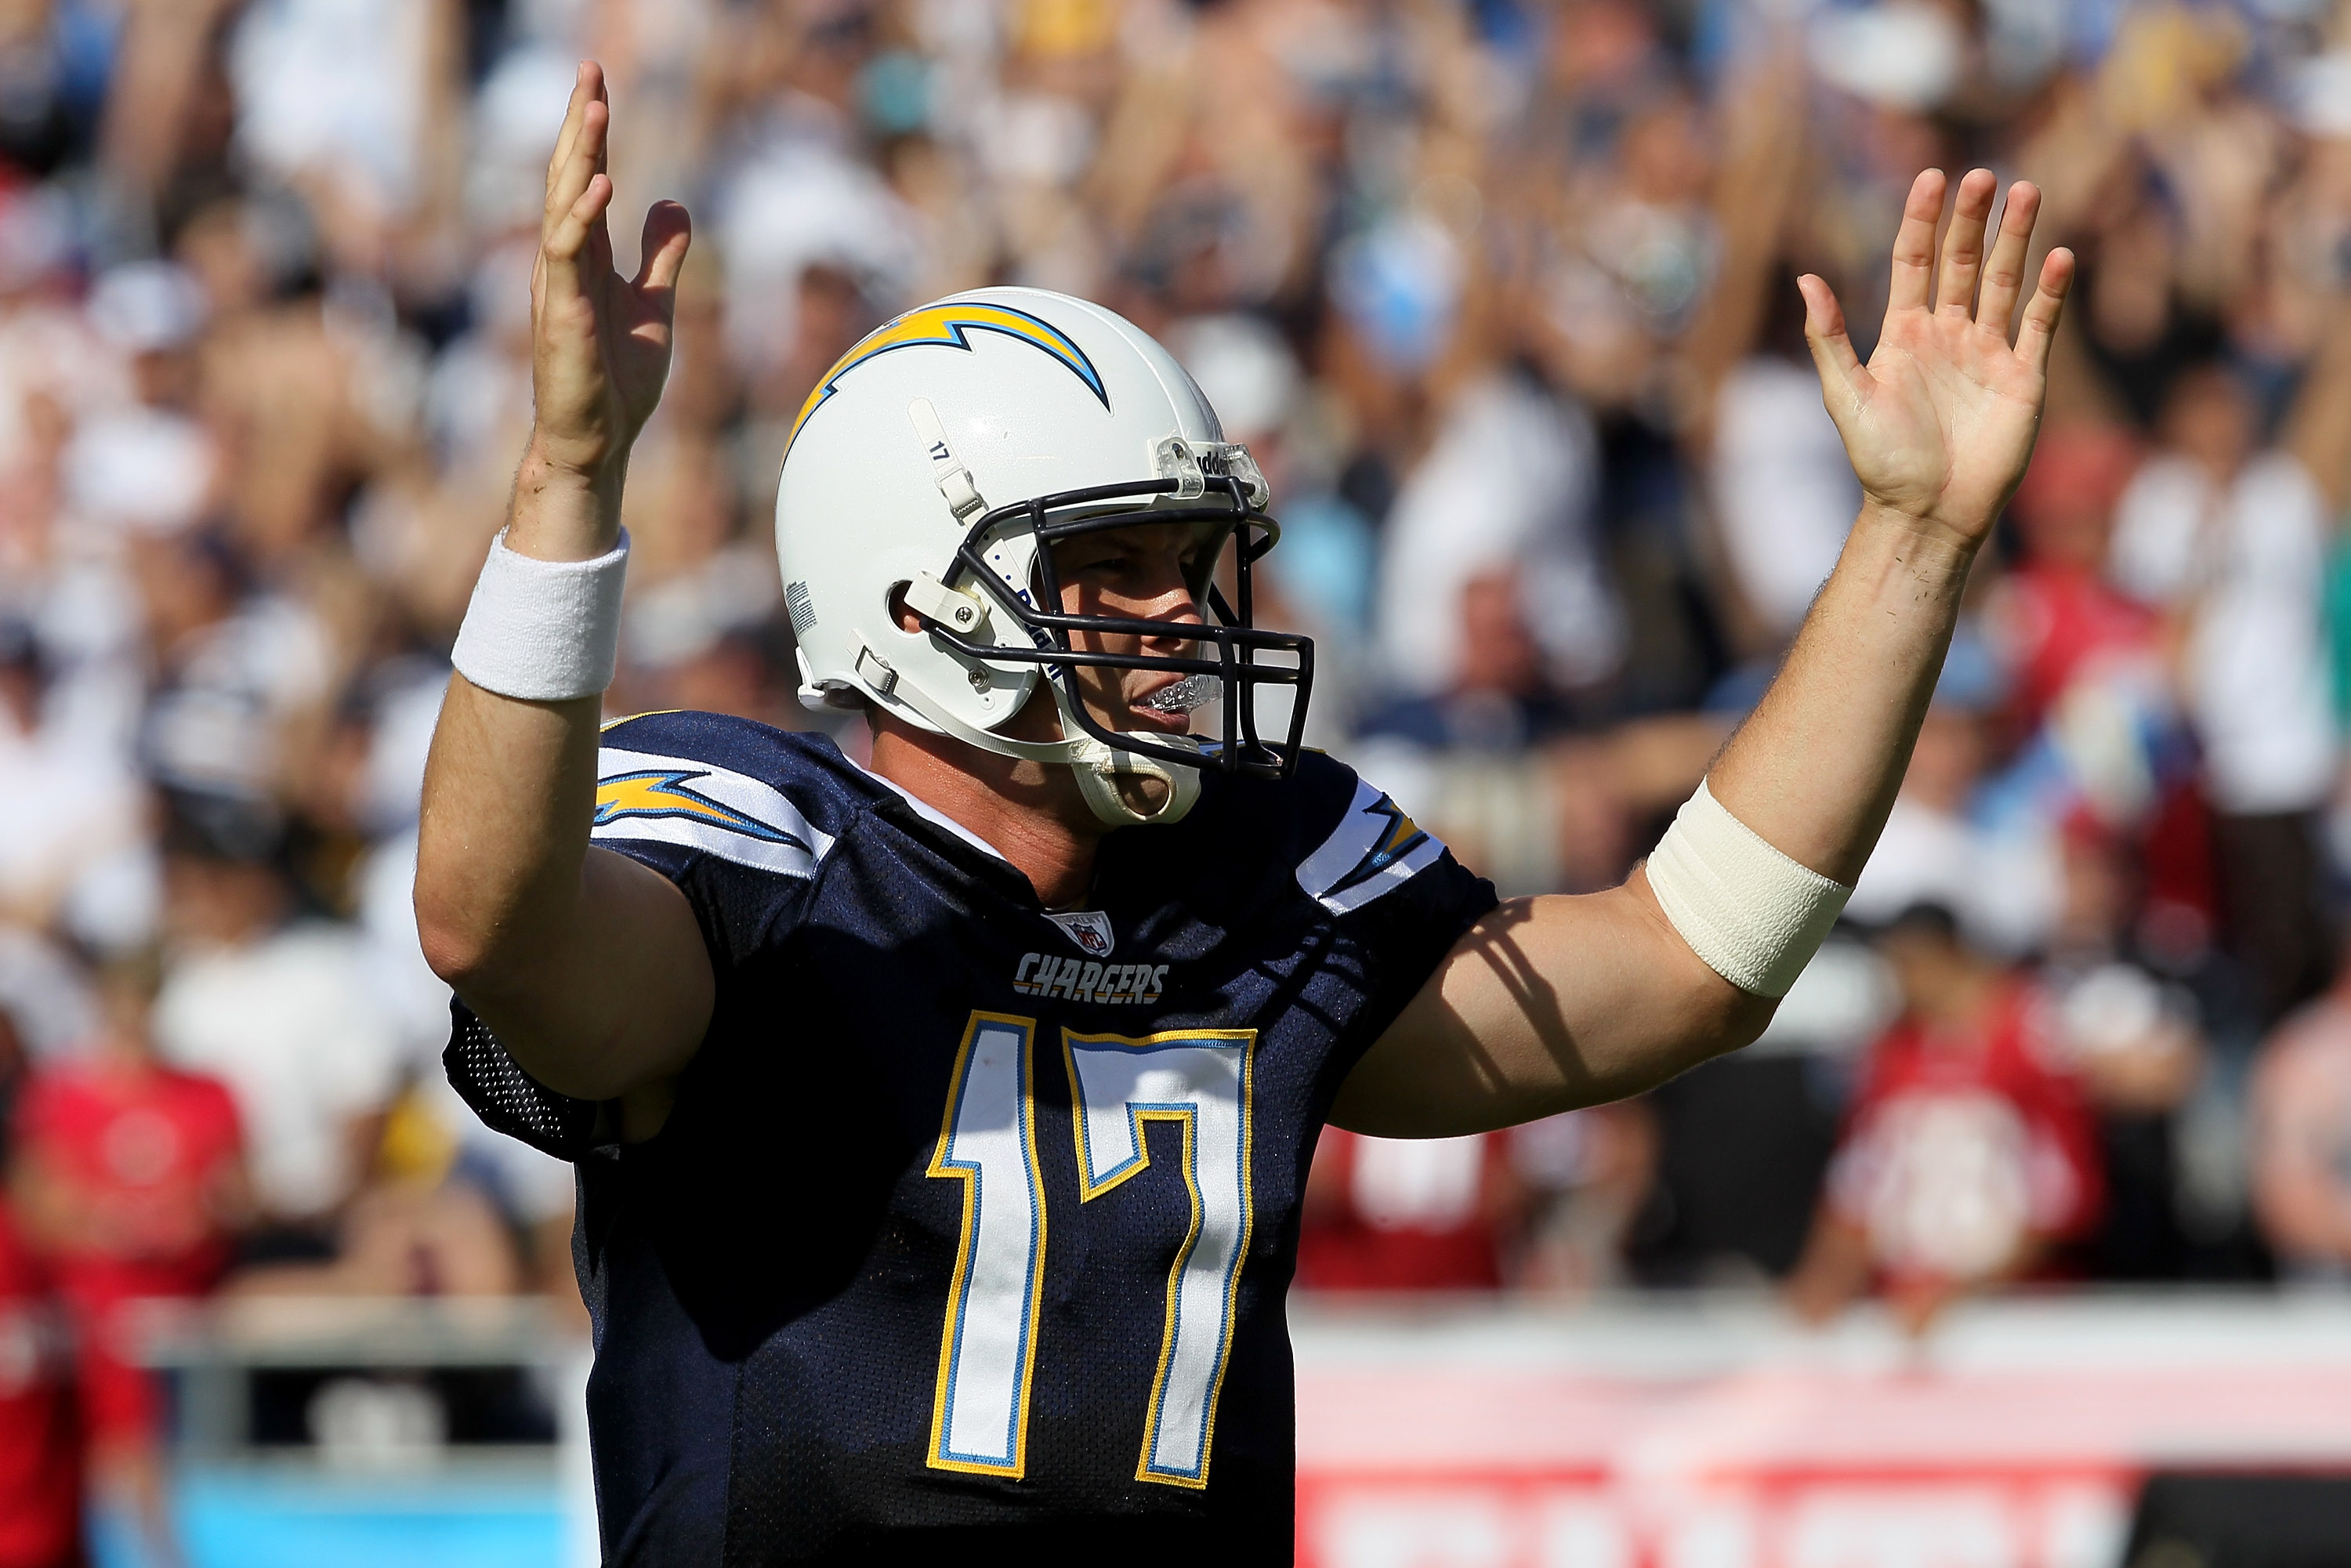 Philip Rivers is a one man show in San Diego this season